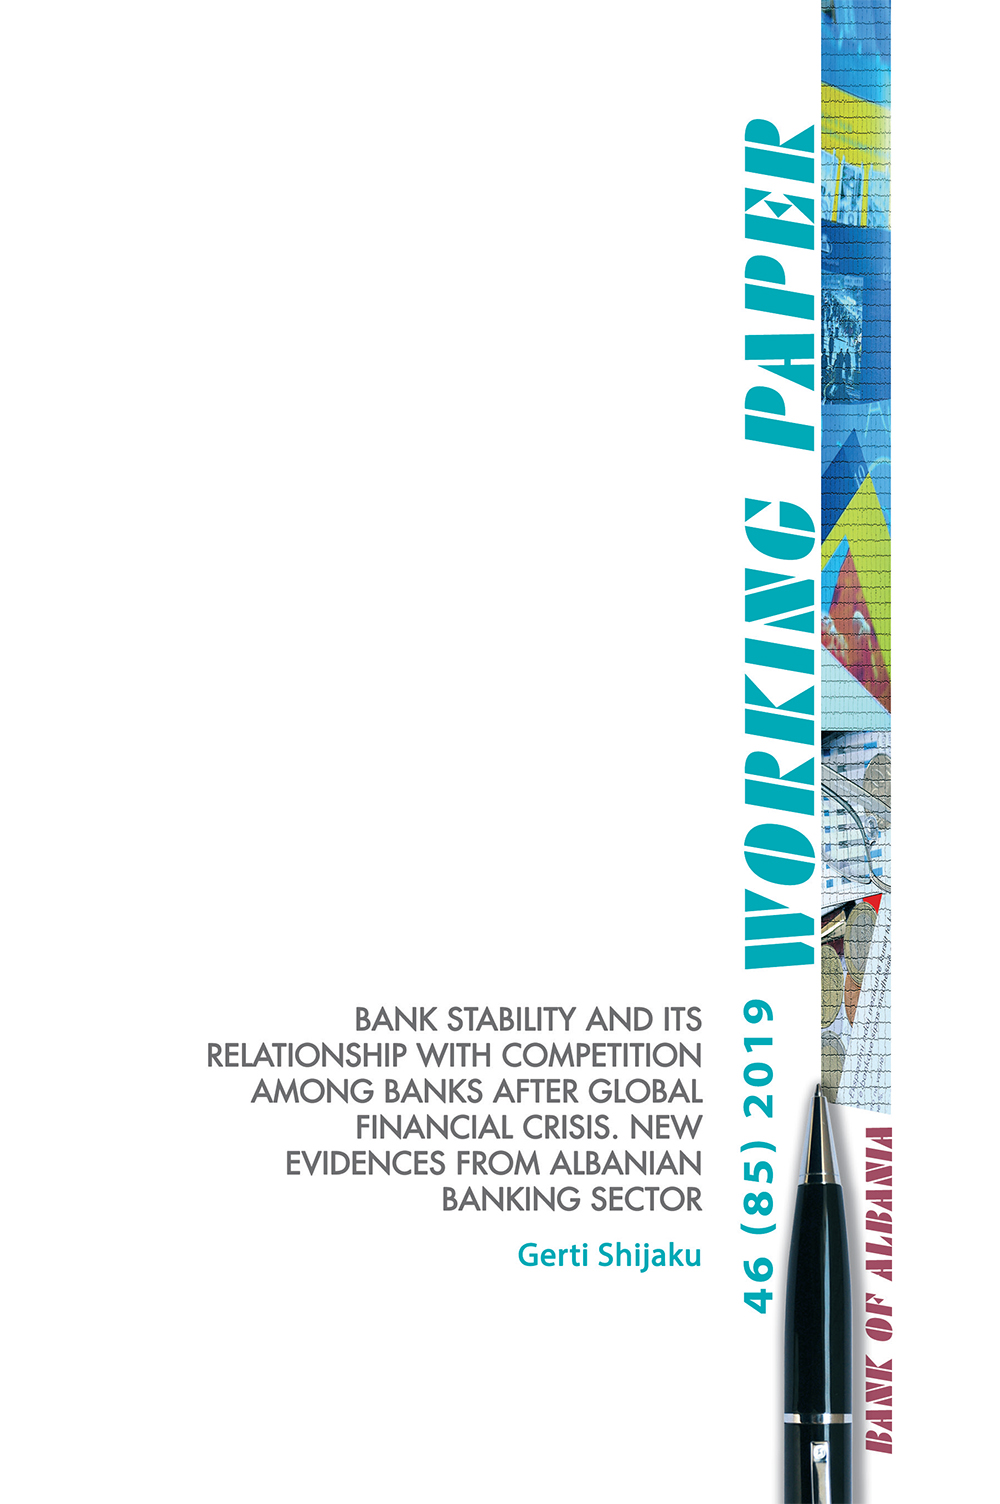 Bank stability and its relationship with competition among banks after global financial crisis. New evidences from Albanian banking sector